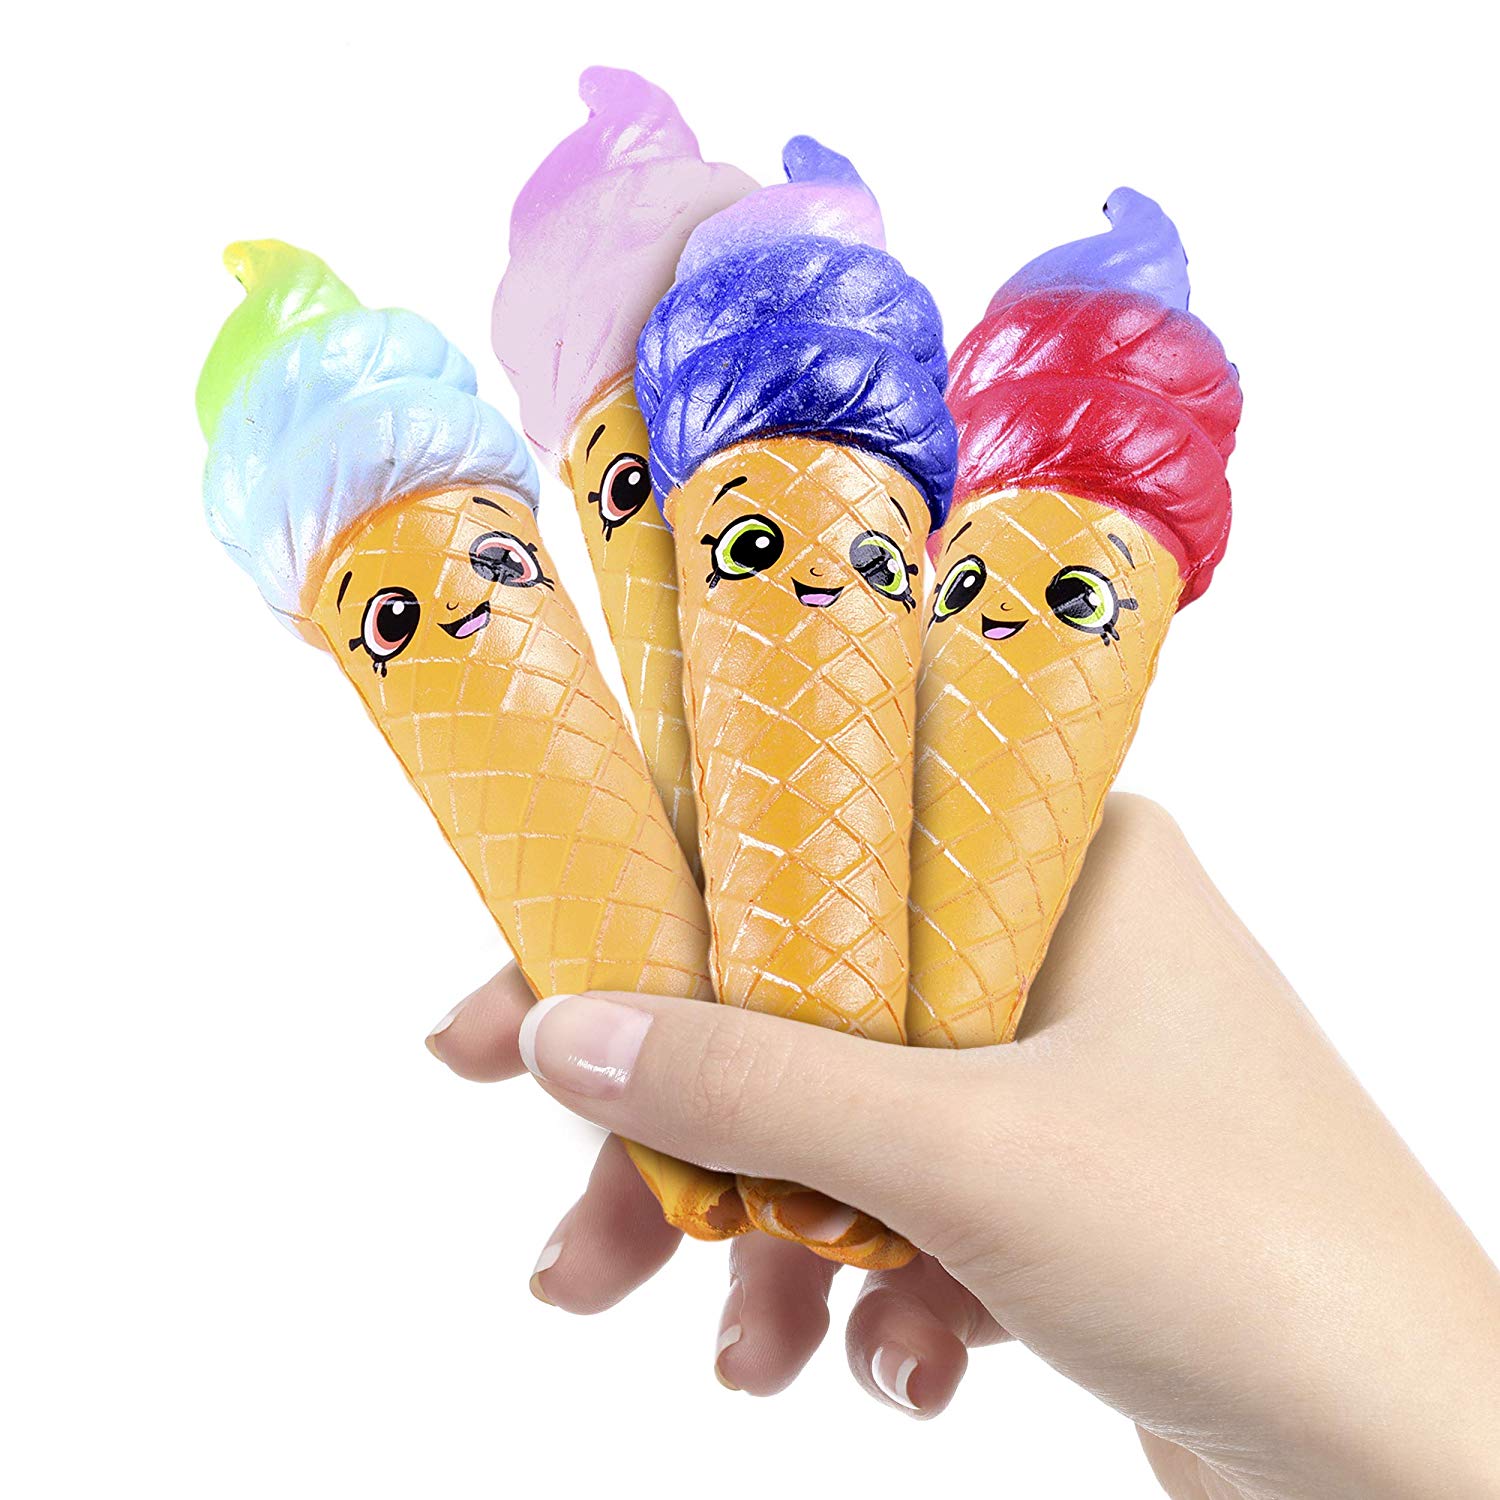 Squishy-Pen-Cap-Smile-Face-Ice-Cream-Cone-Slow-Rising-Jumbo-With-Pen-Stress-Relief-Toys-Student-Offi-1434062-6